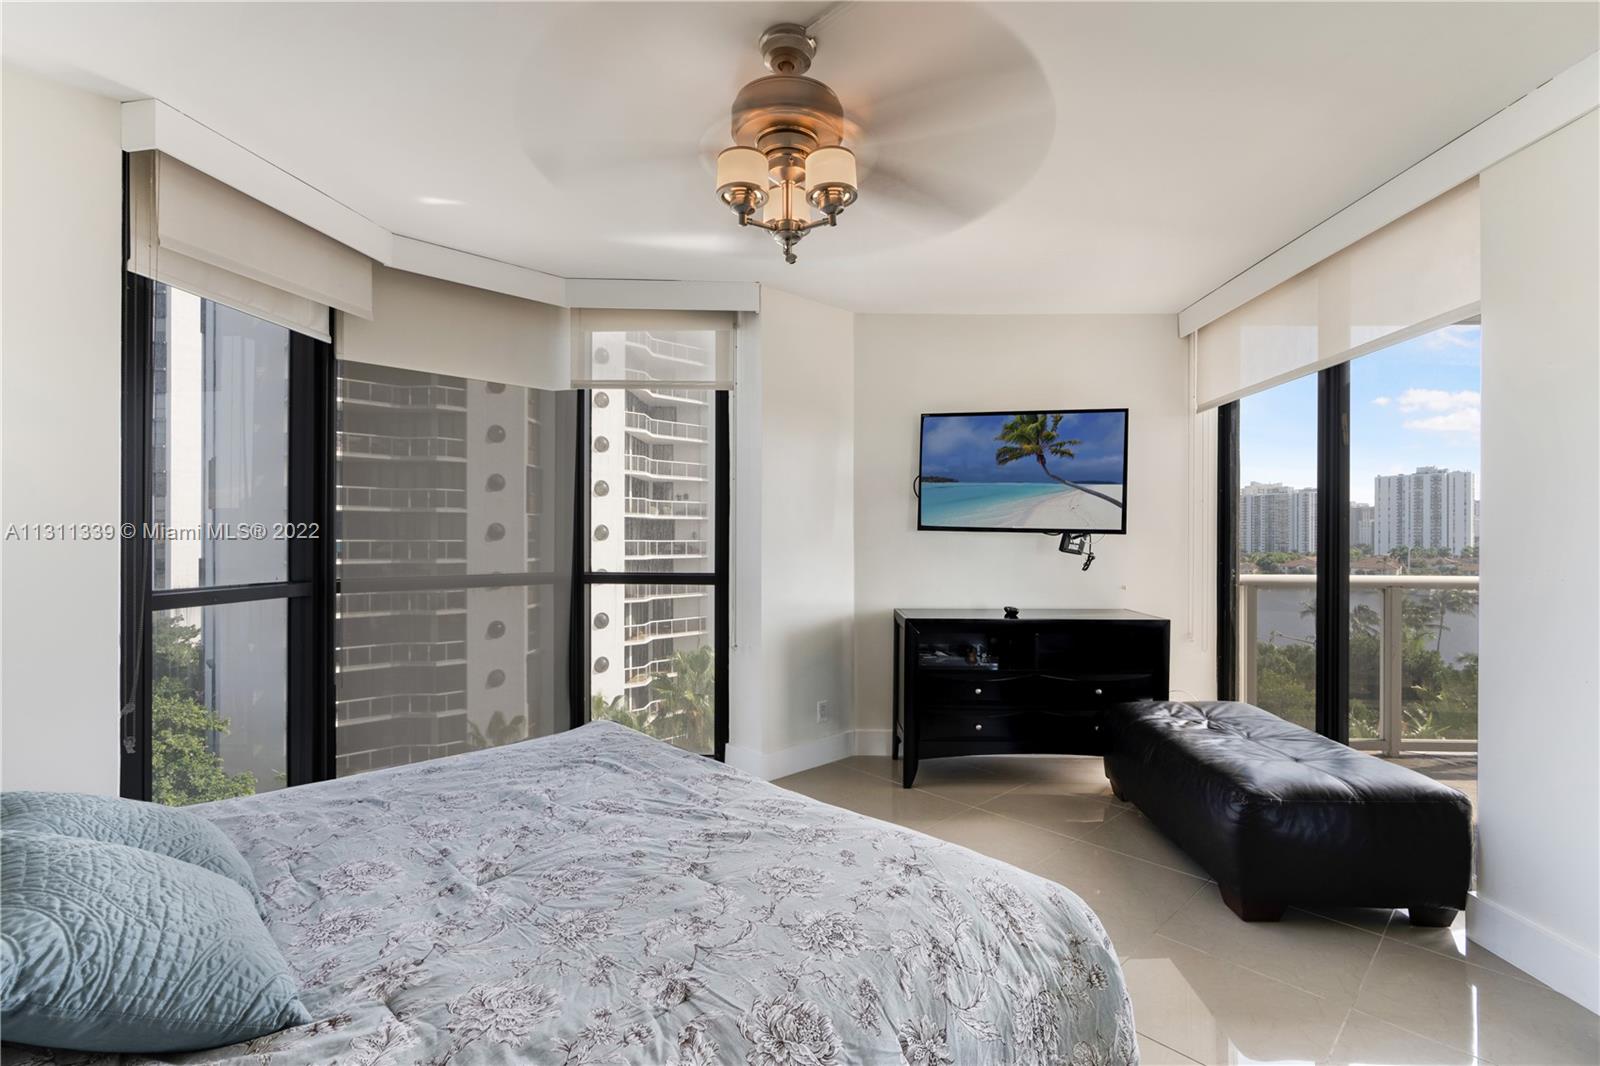 3rd bedroom with amazing views!